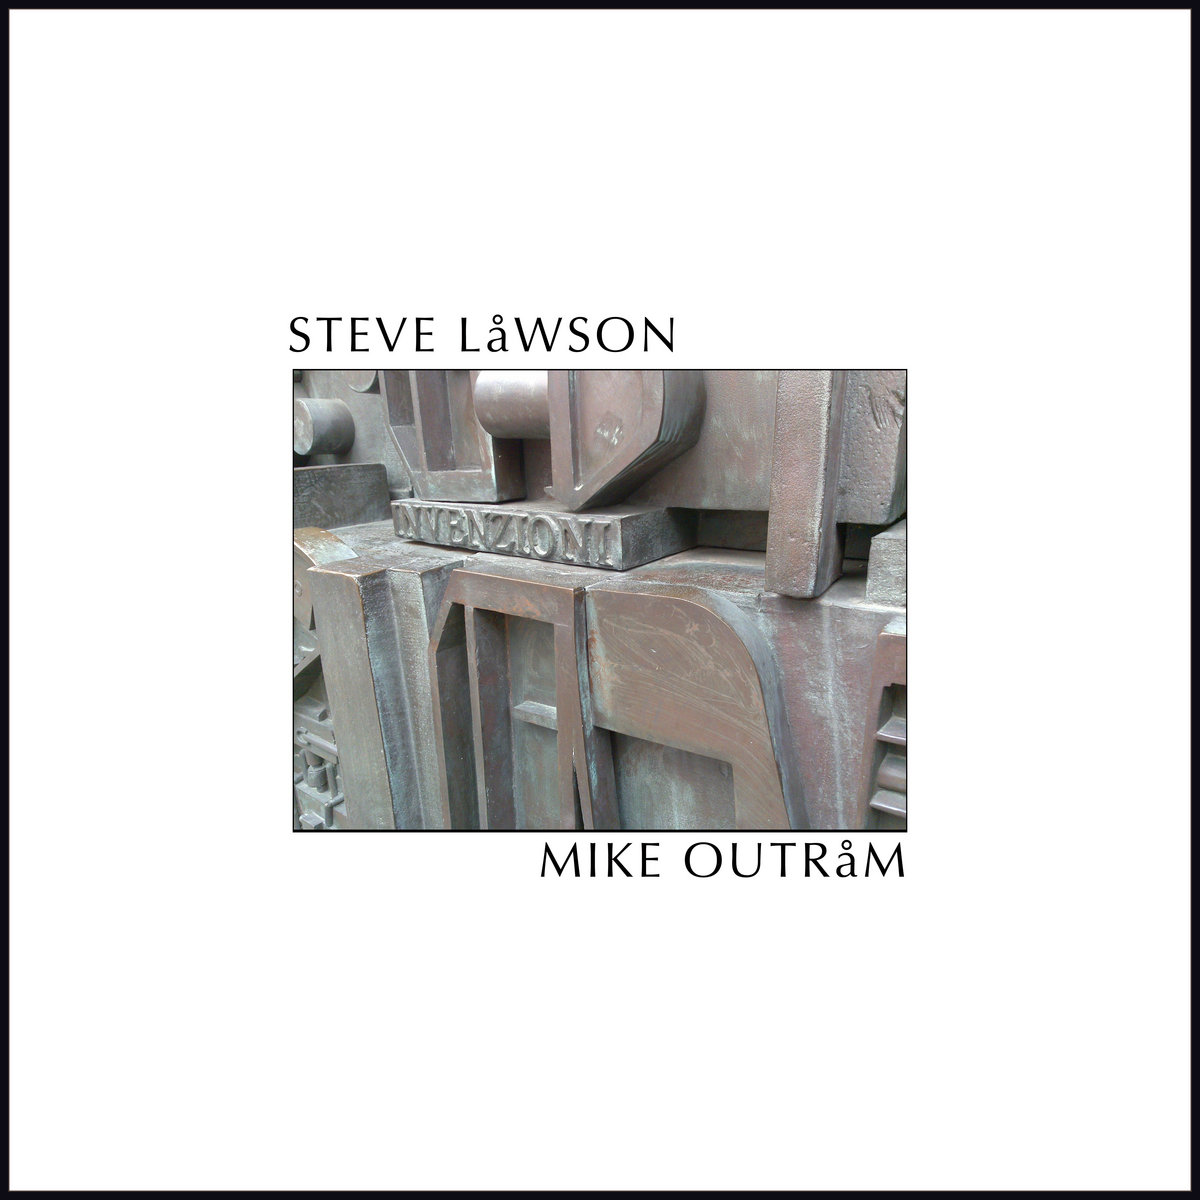 Steve Lawson and Mike Outram – Invenzioni (2012) [Official Digital Download 24bit/44,1kHz]